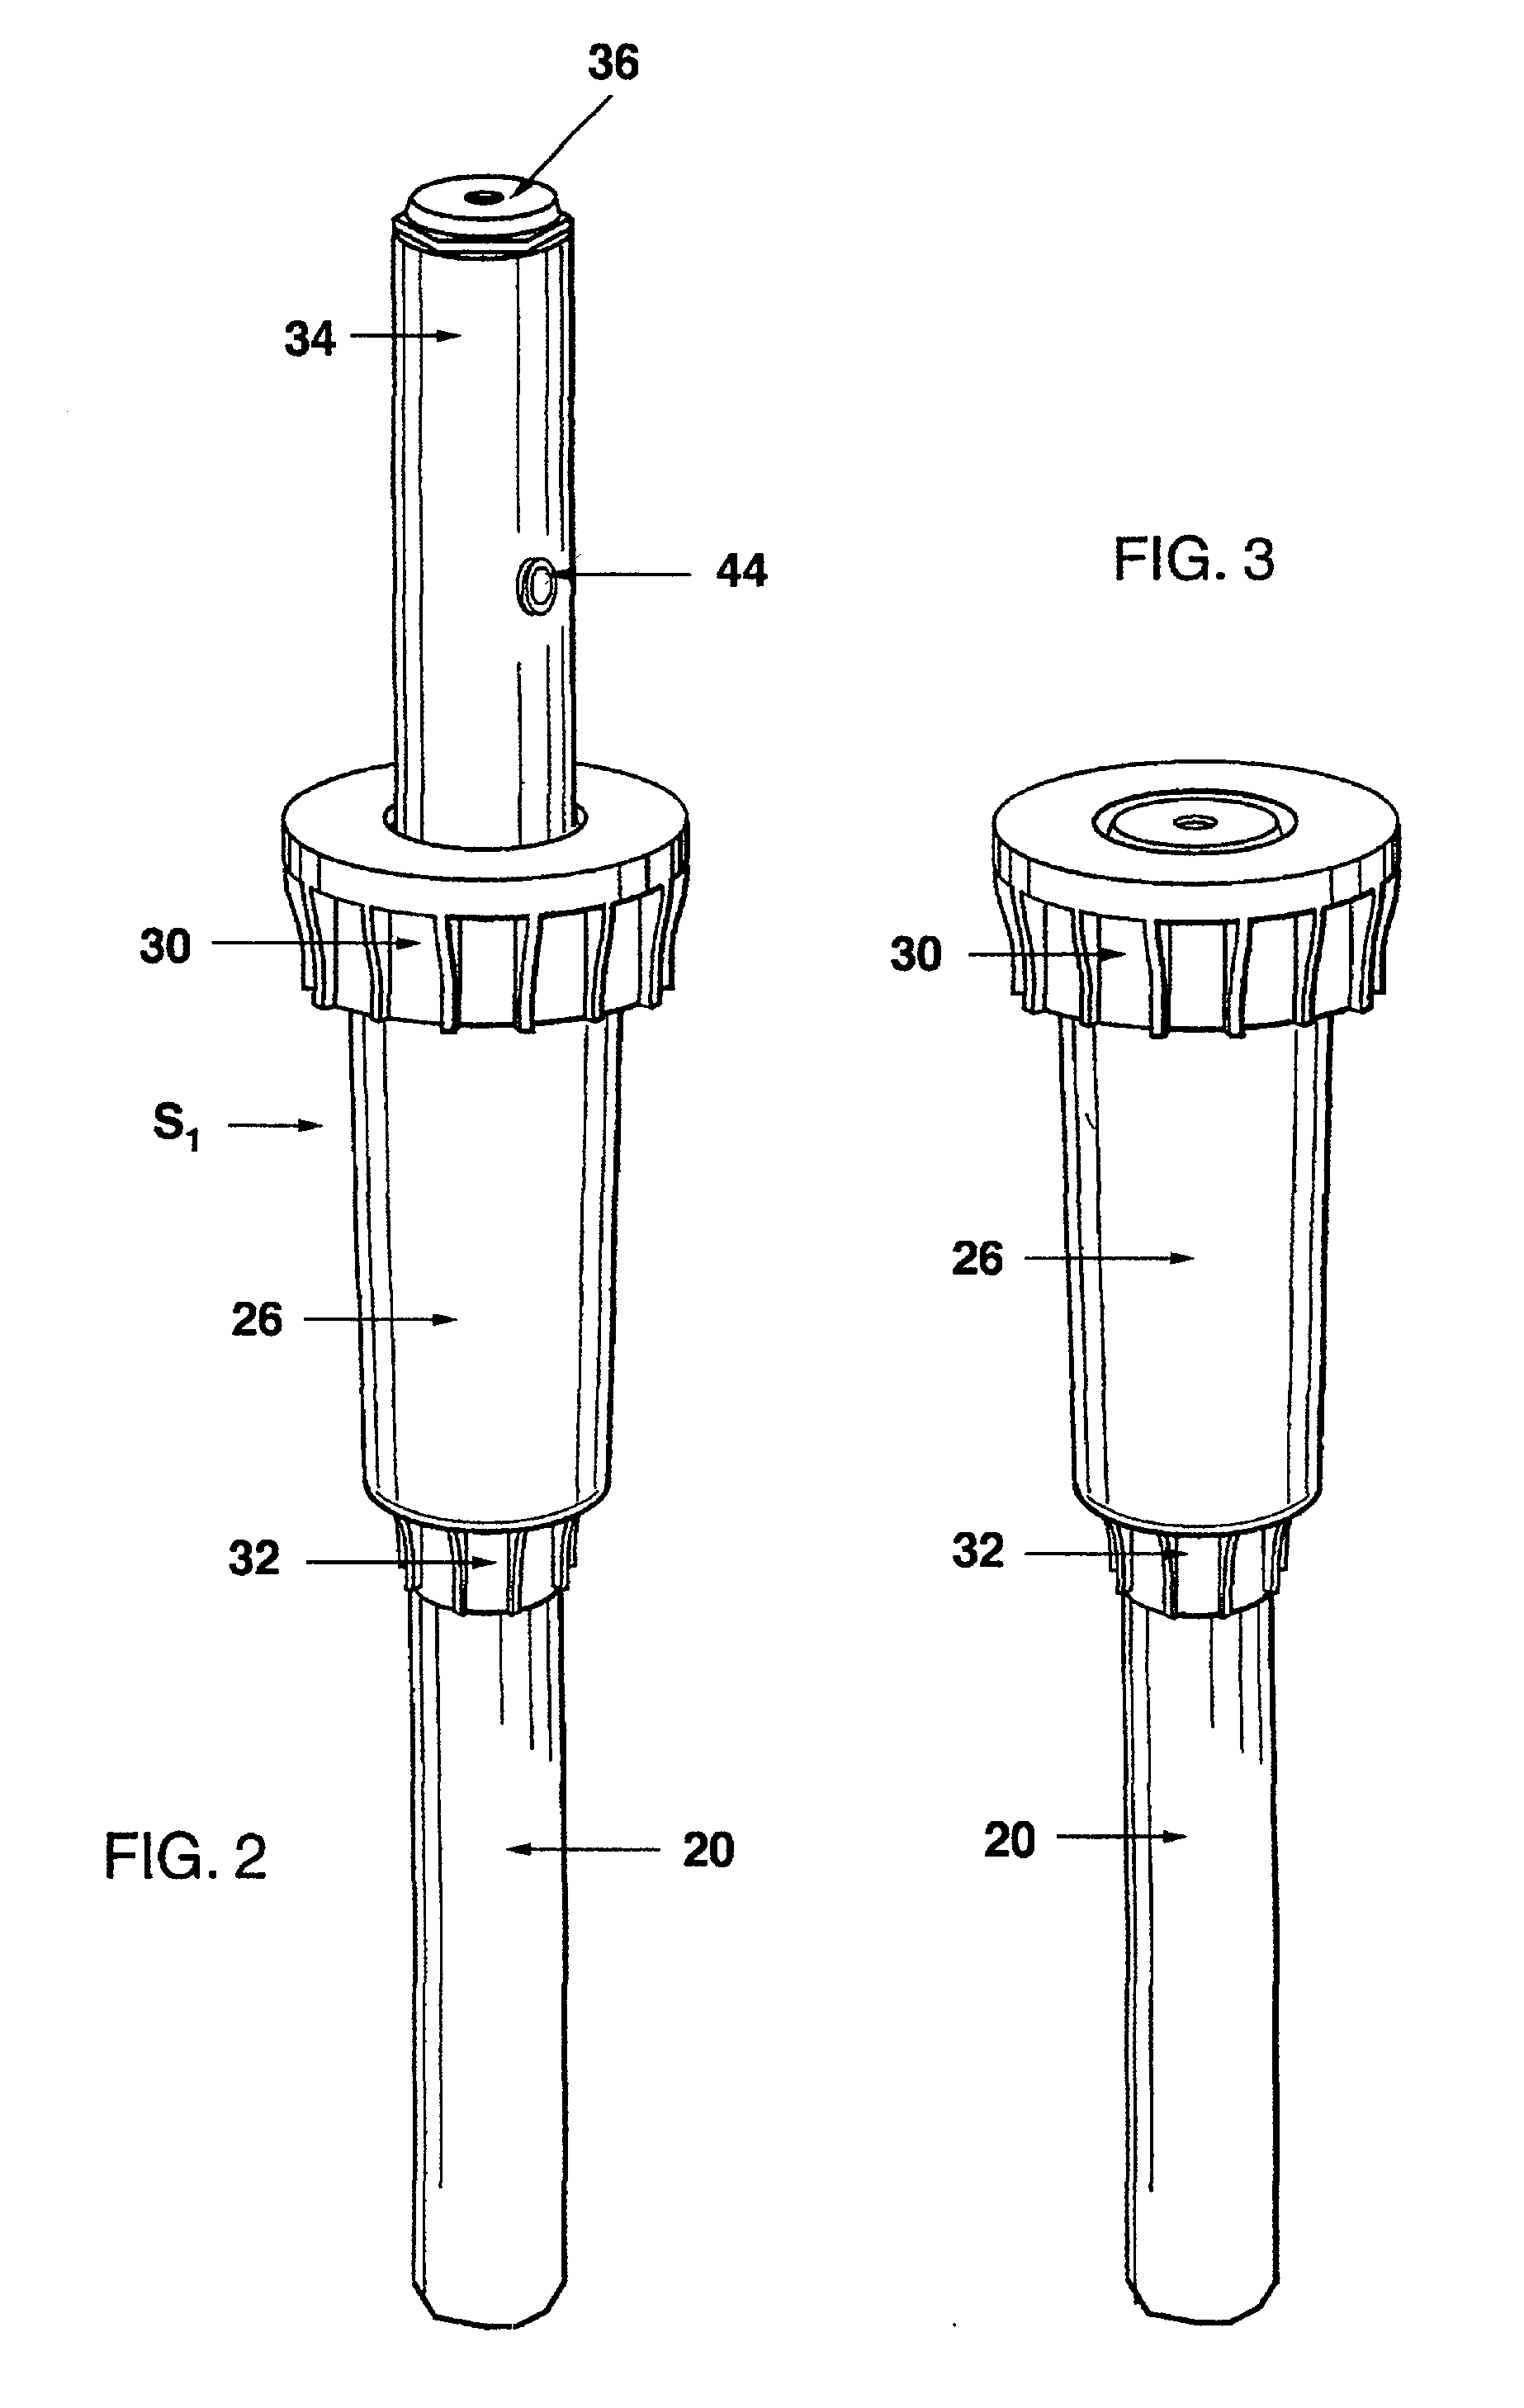 Water sprinkler head with integral off-on water flow control valve and adaptive fittings therefor